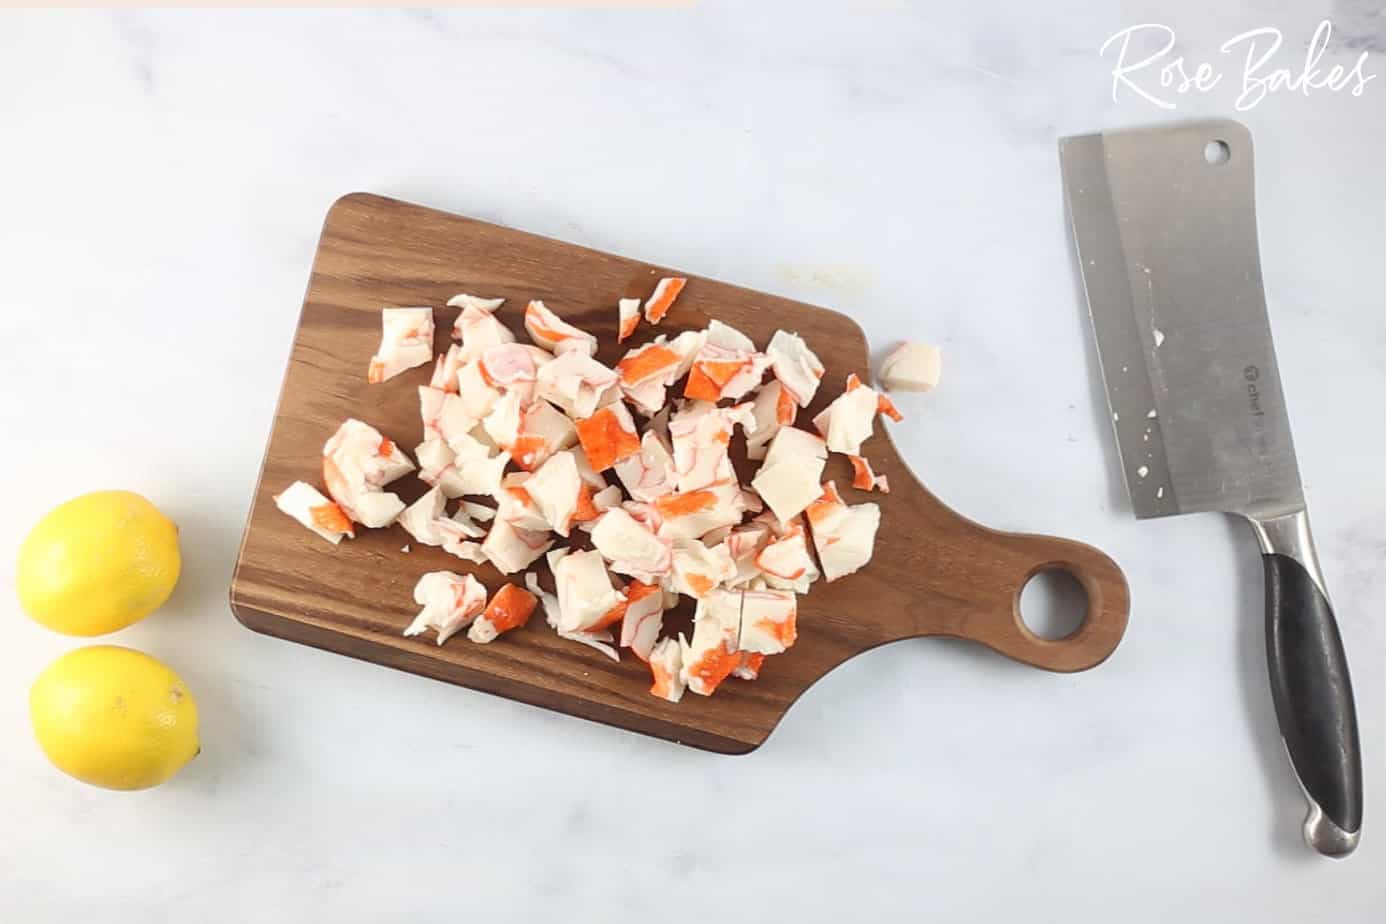 chopped imitation crab meat on a cutting board with lemons and a knife on the counter next to it